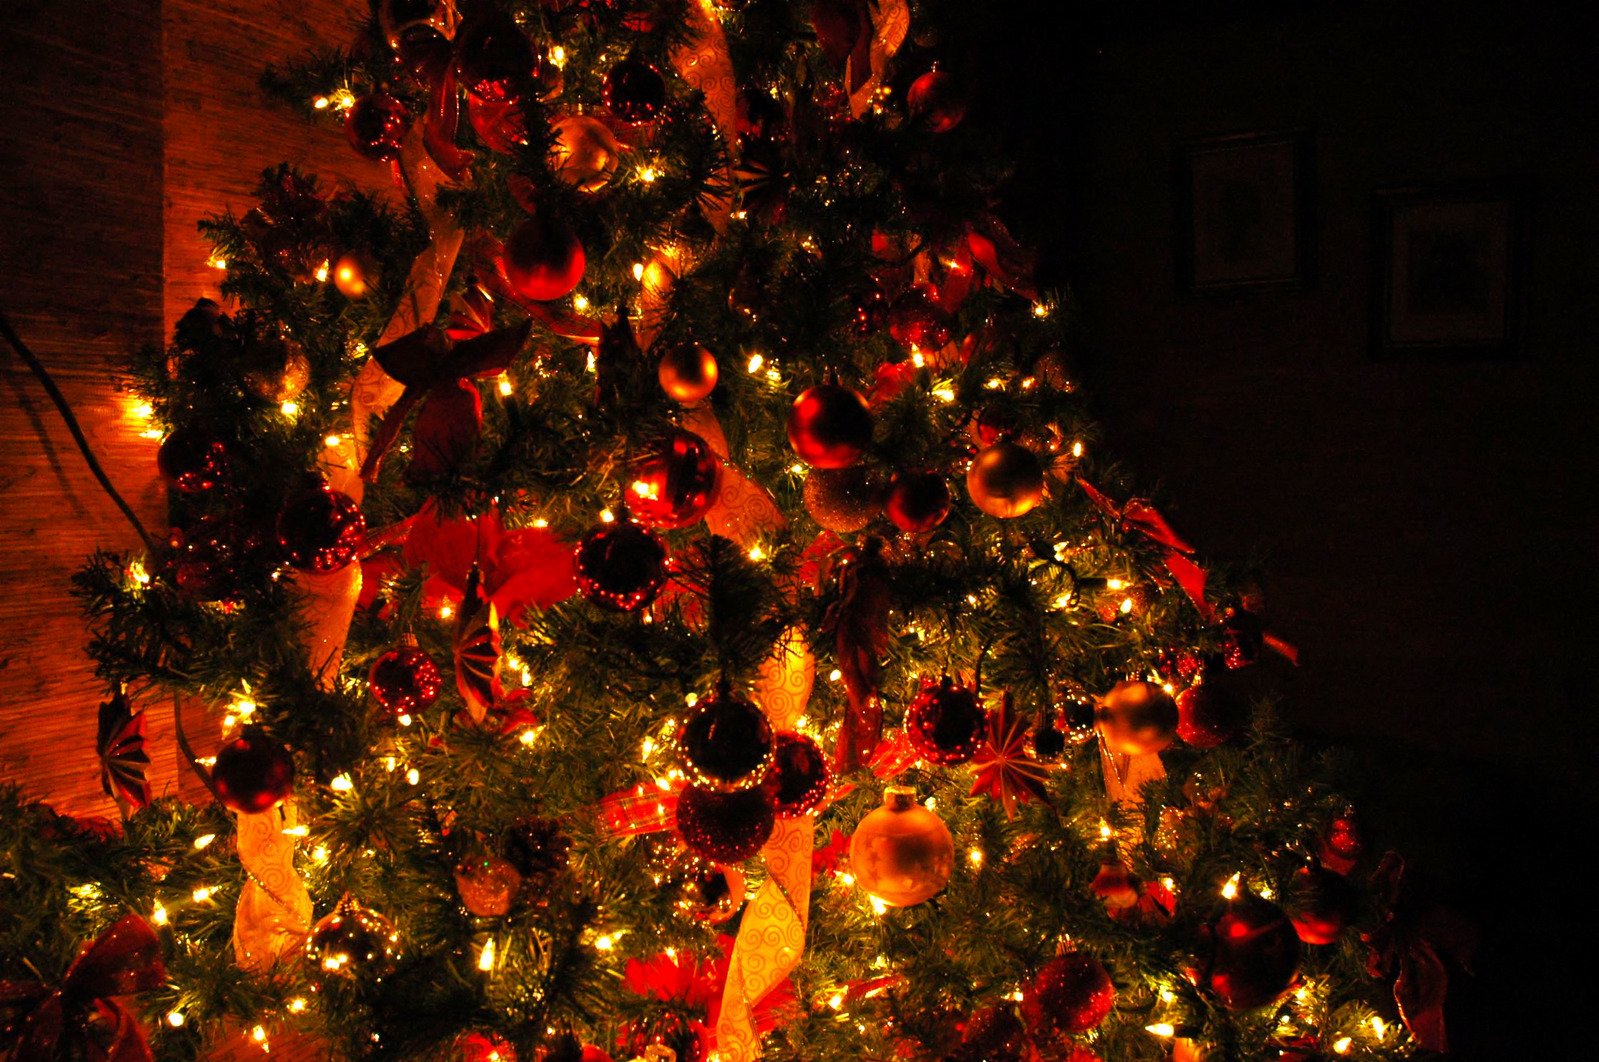 lit christmas tree decorated with ornaments in dark room